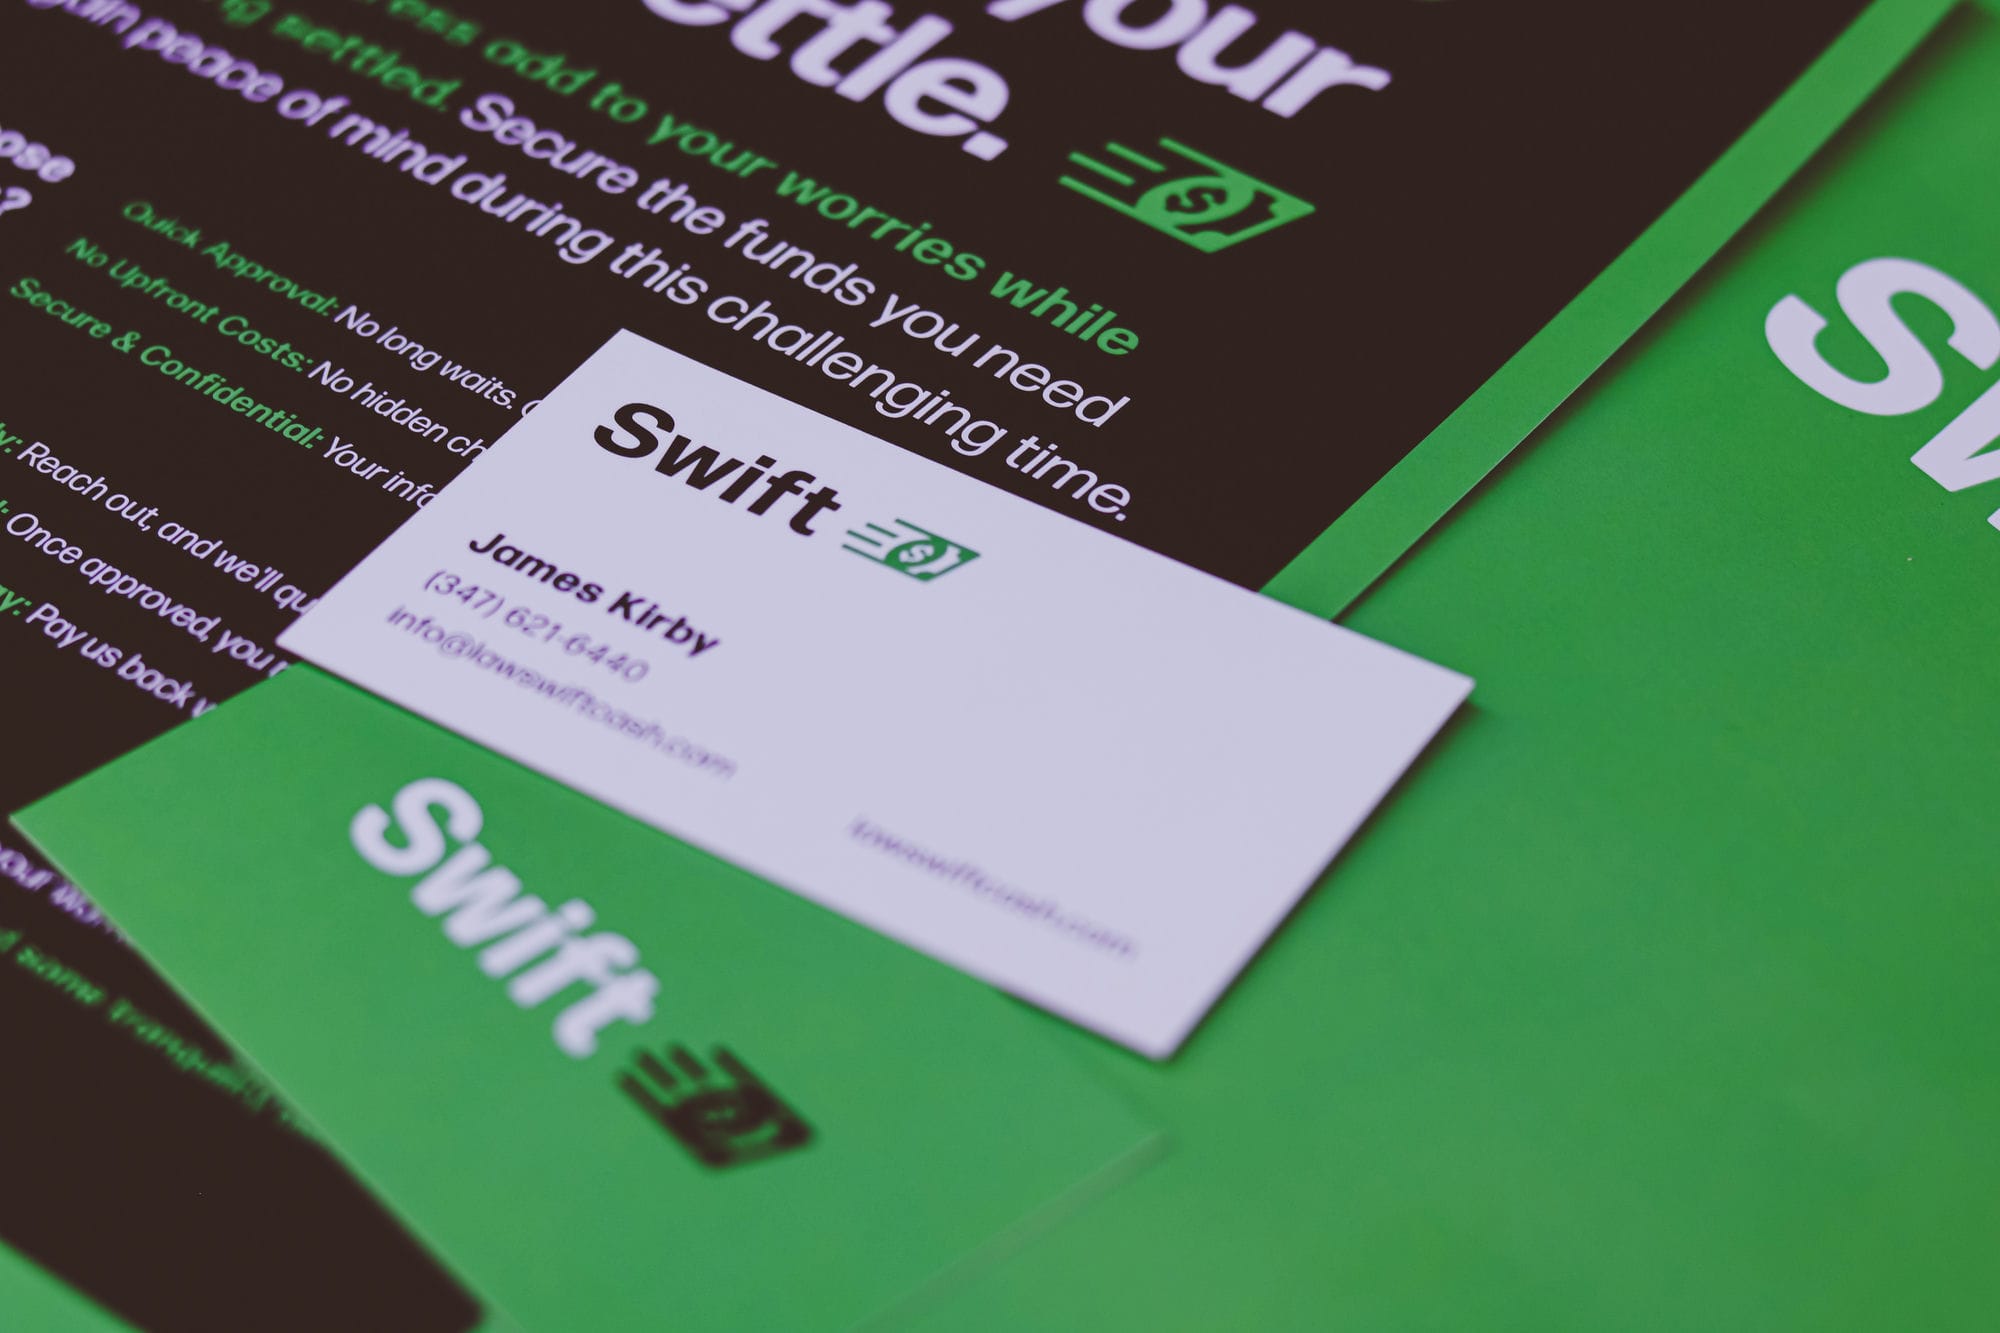 Close-up of a business card designed by Graticle for Swift Cash, featuring their bold green branding and contact information.